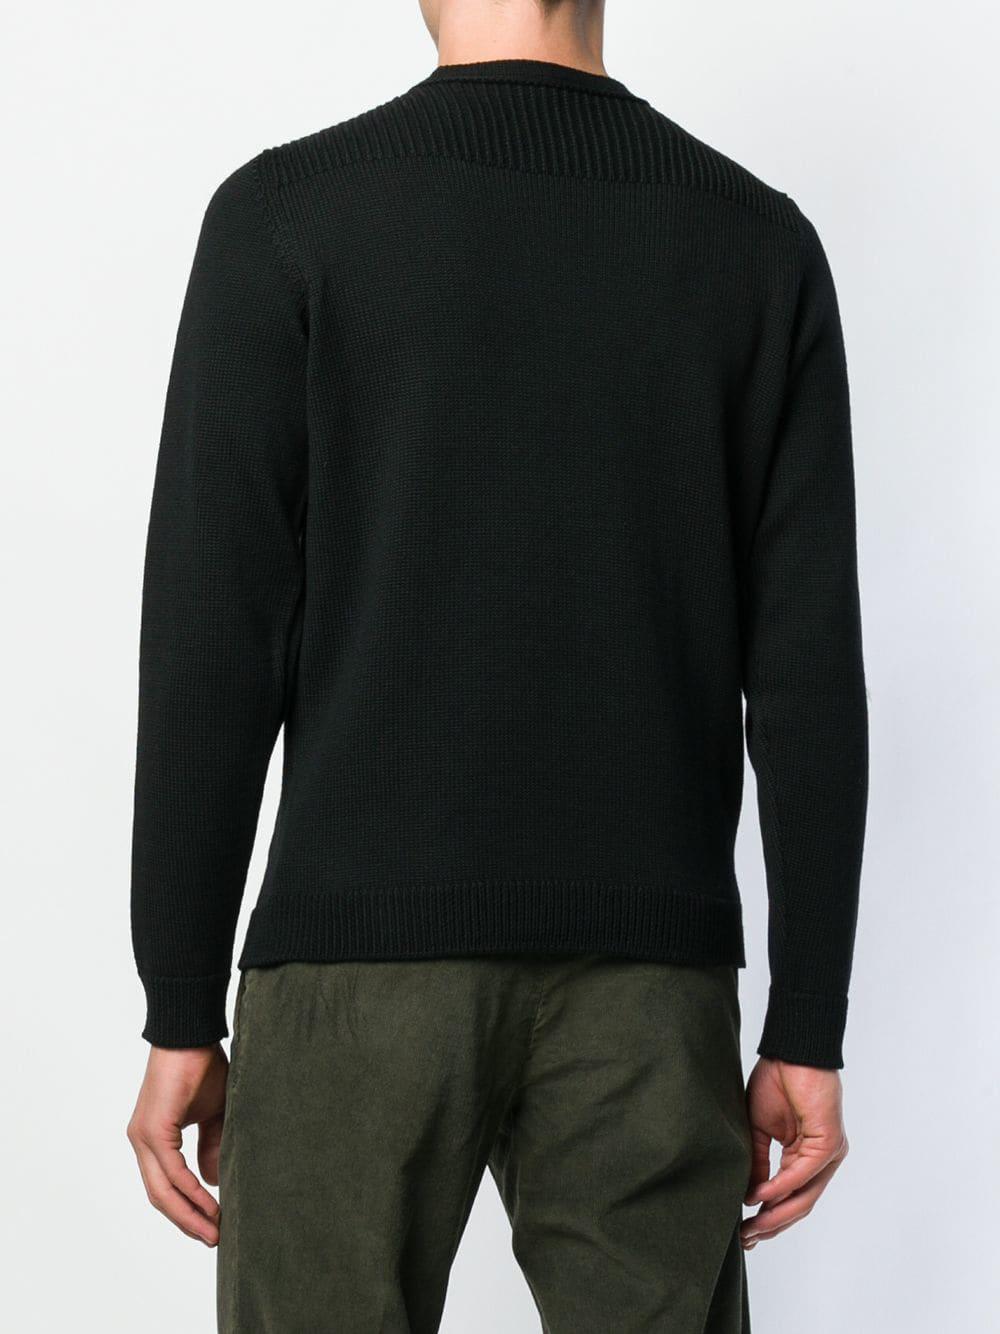 Zanone Ribbed Round Neck Sweater in Black for Men - Lyst